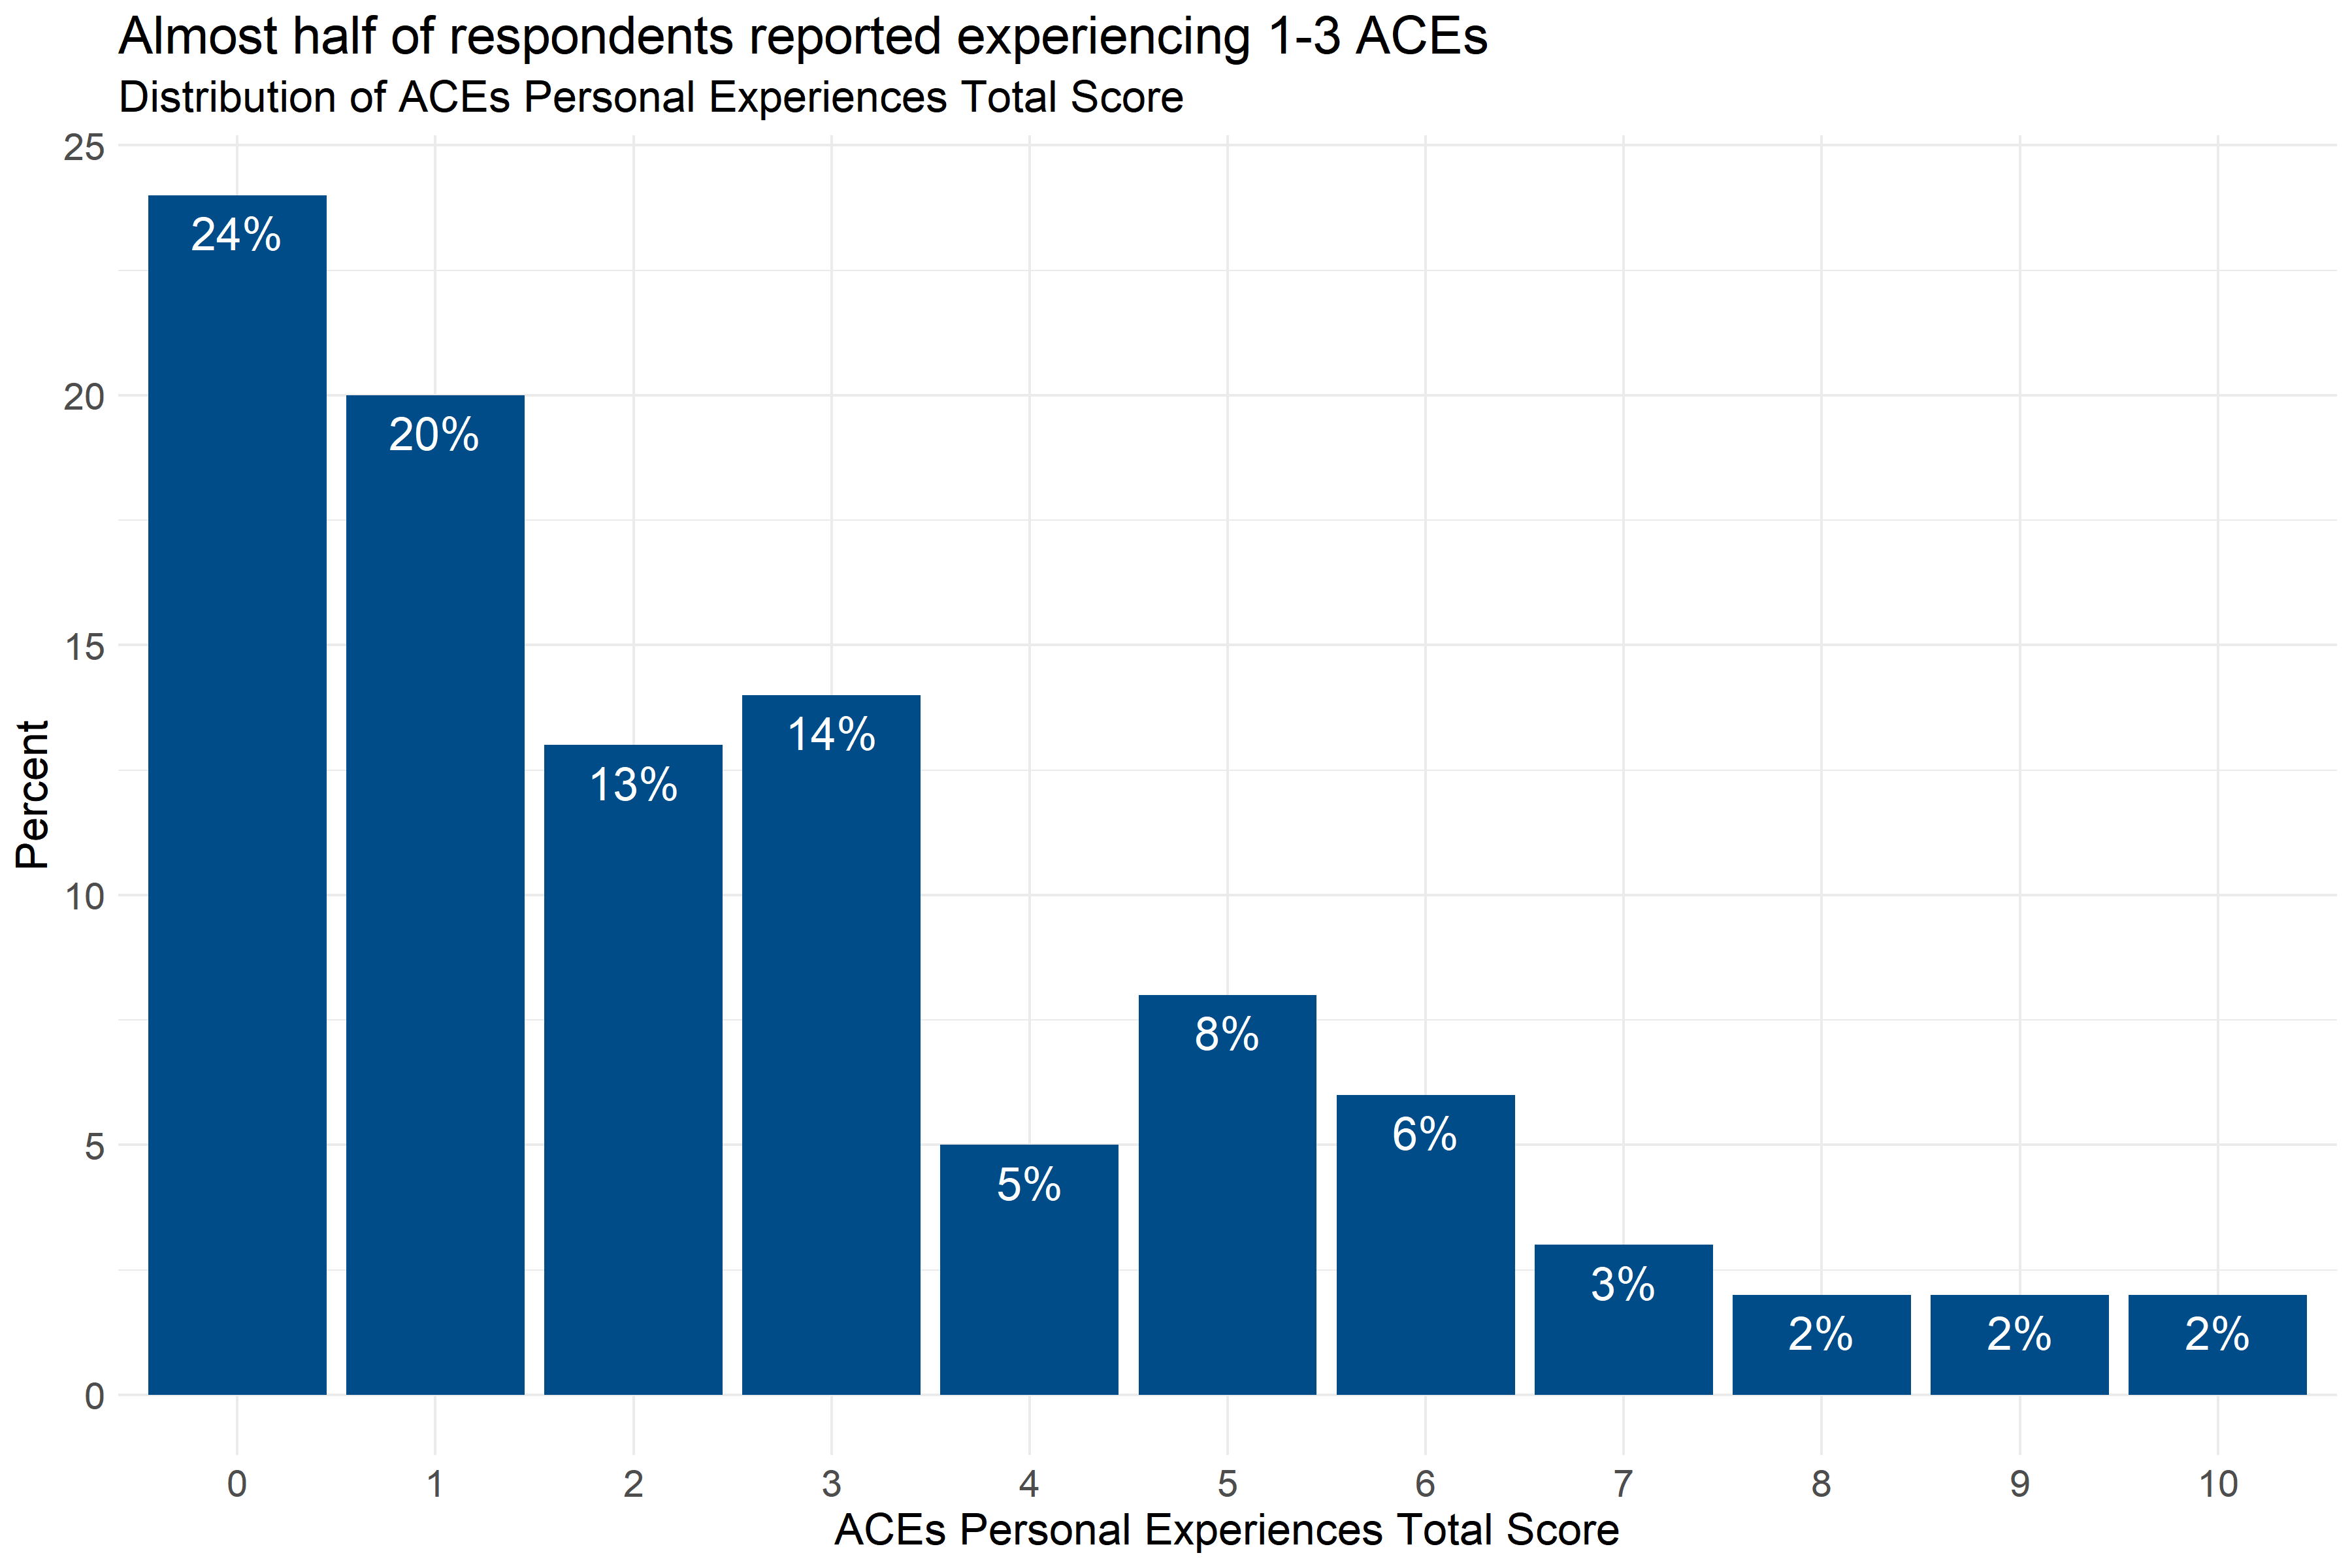 Distribution of the number of ACEs reported by respondents